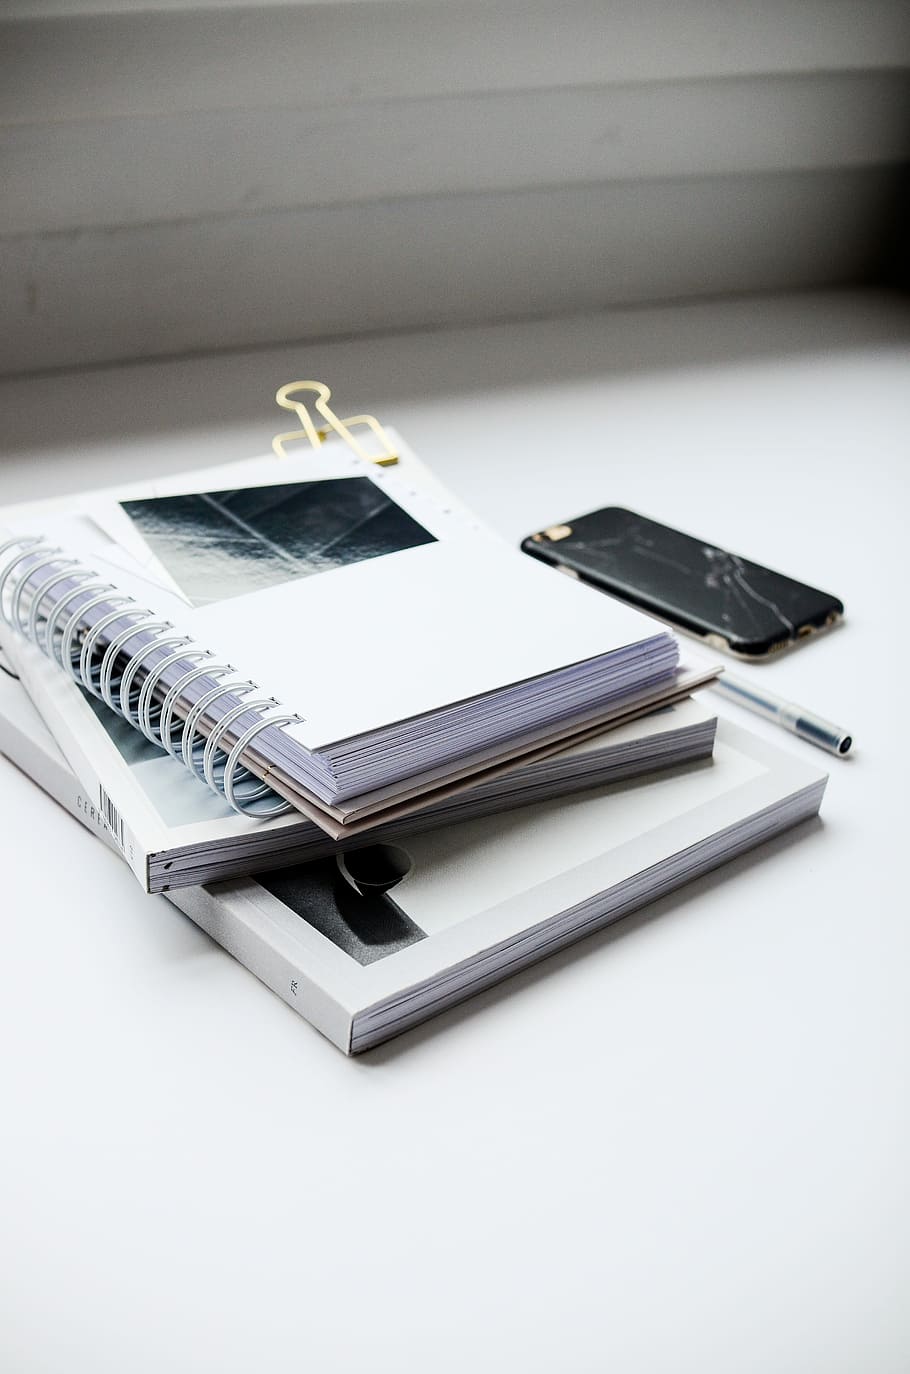 white spiral notebook beside black smartphone on white table, black and white iPhone marble case near ballpoint pen and three books, HD wallpaper